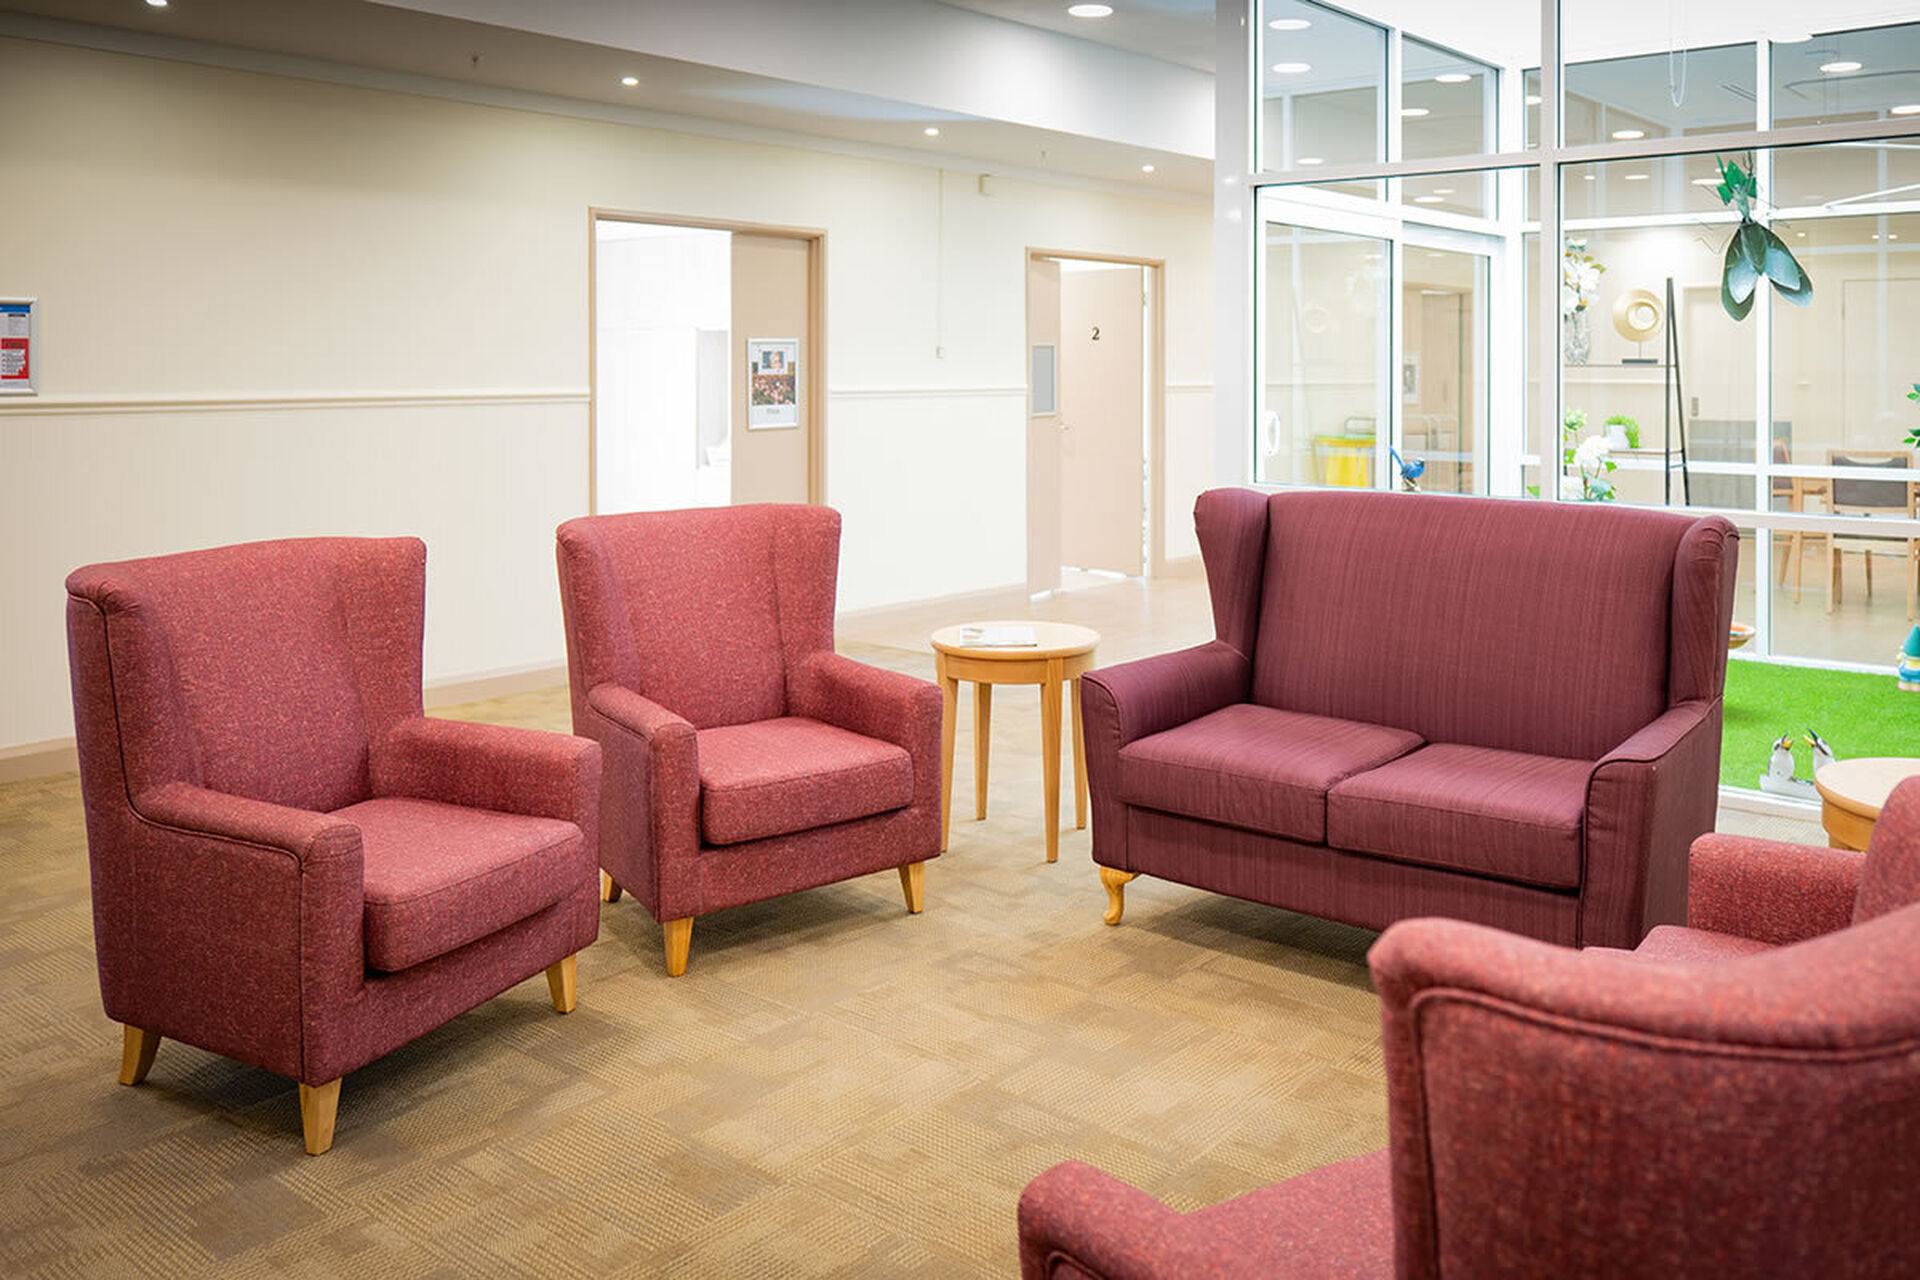 spacious sitting area for nursing home residents at baptistcare graceford aged care home in byford wa